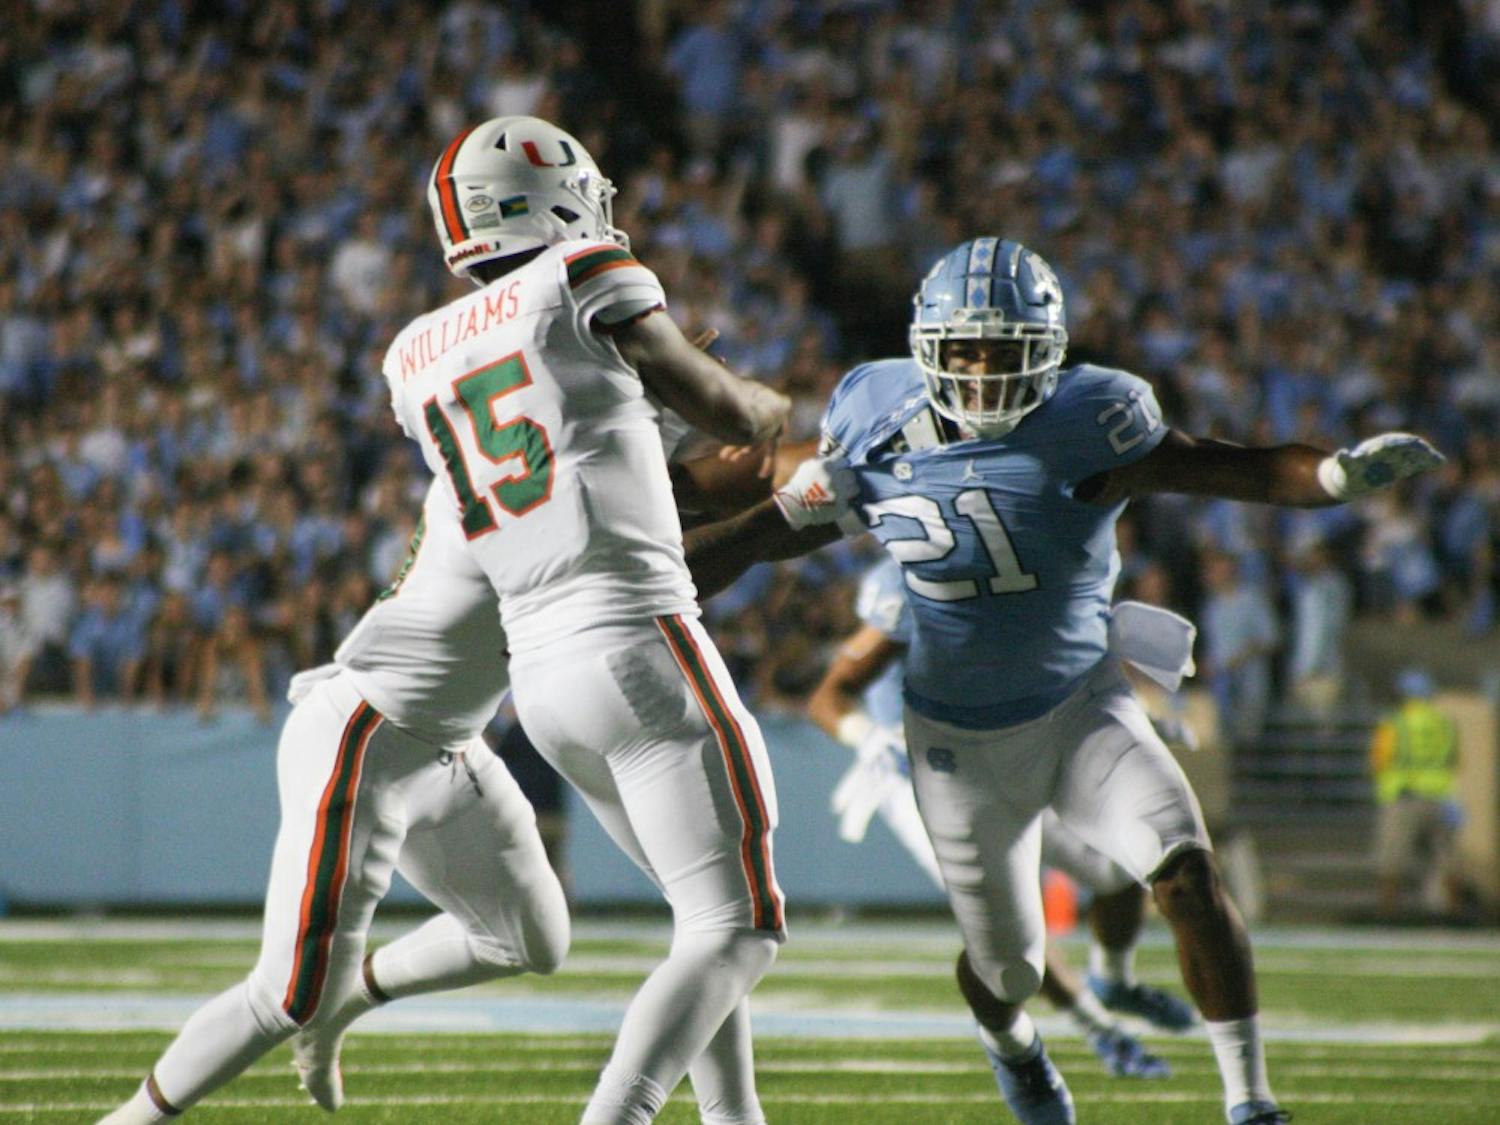 UNC linebacker Chazz Surratt, number 21, is pulled by Miami players on Saturday, Sept. 7, 2019. UNC beat Miami 28-25.